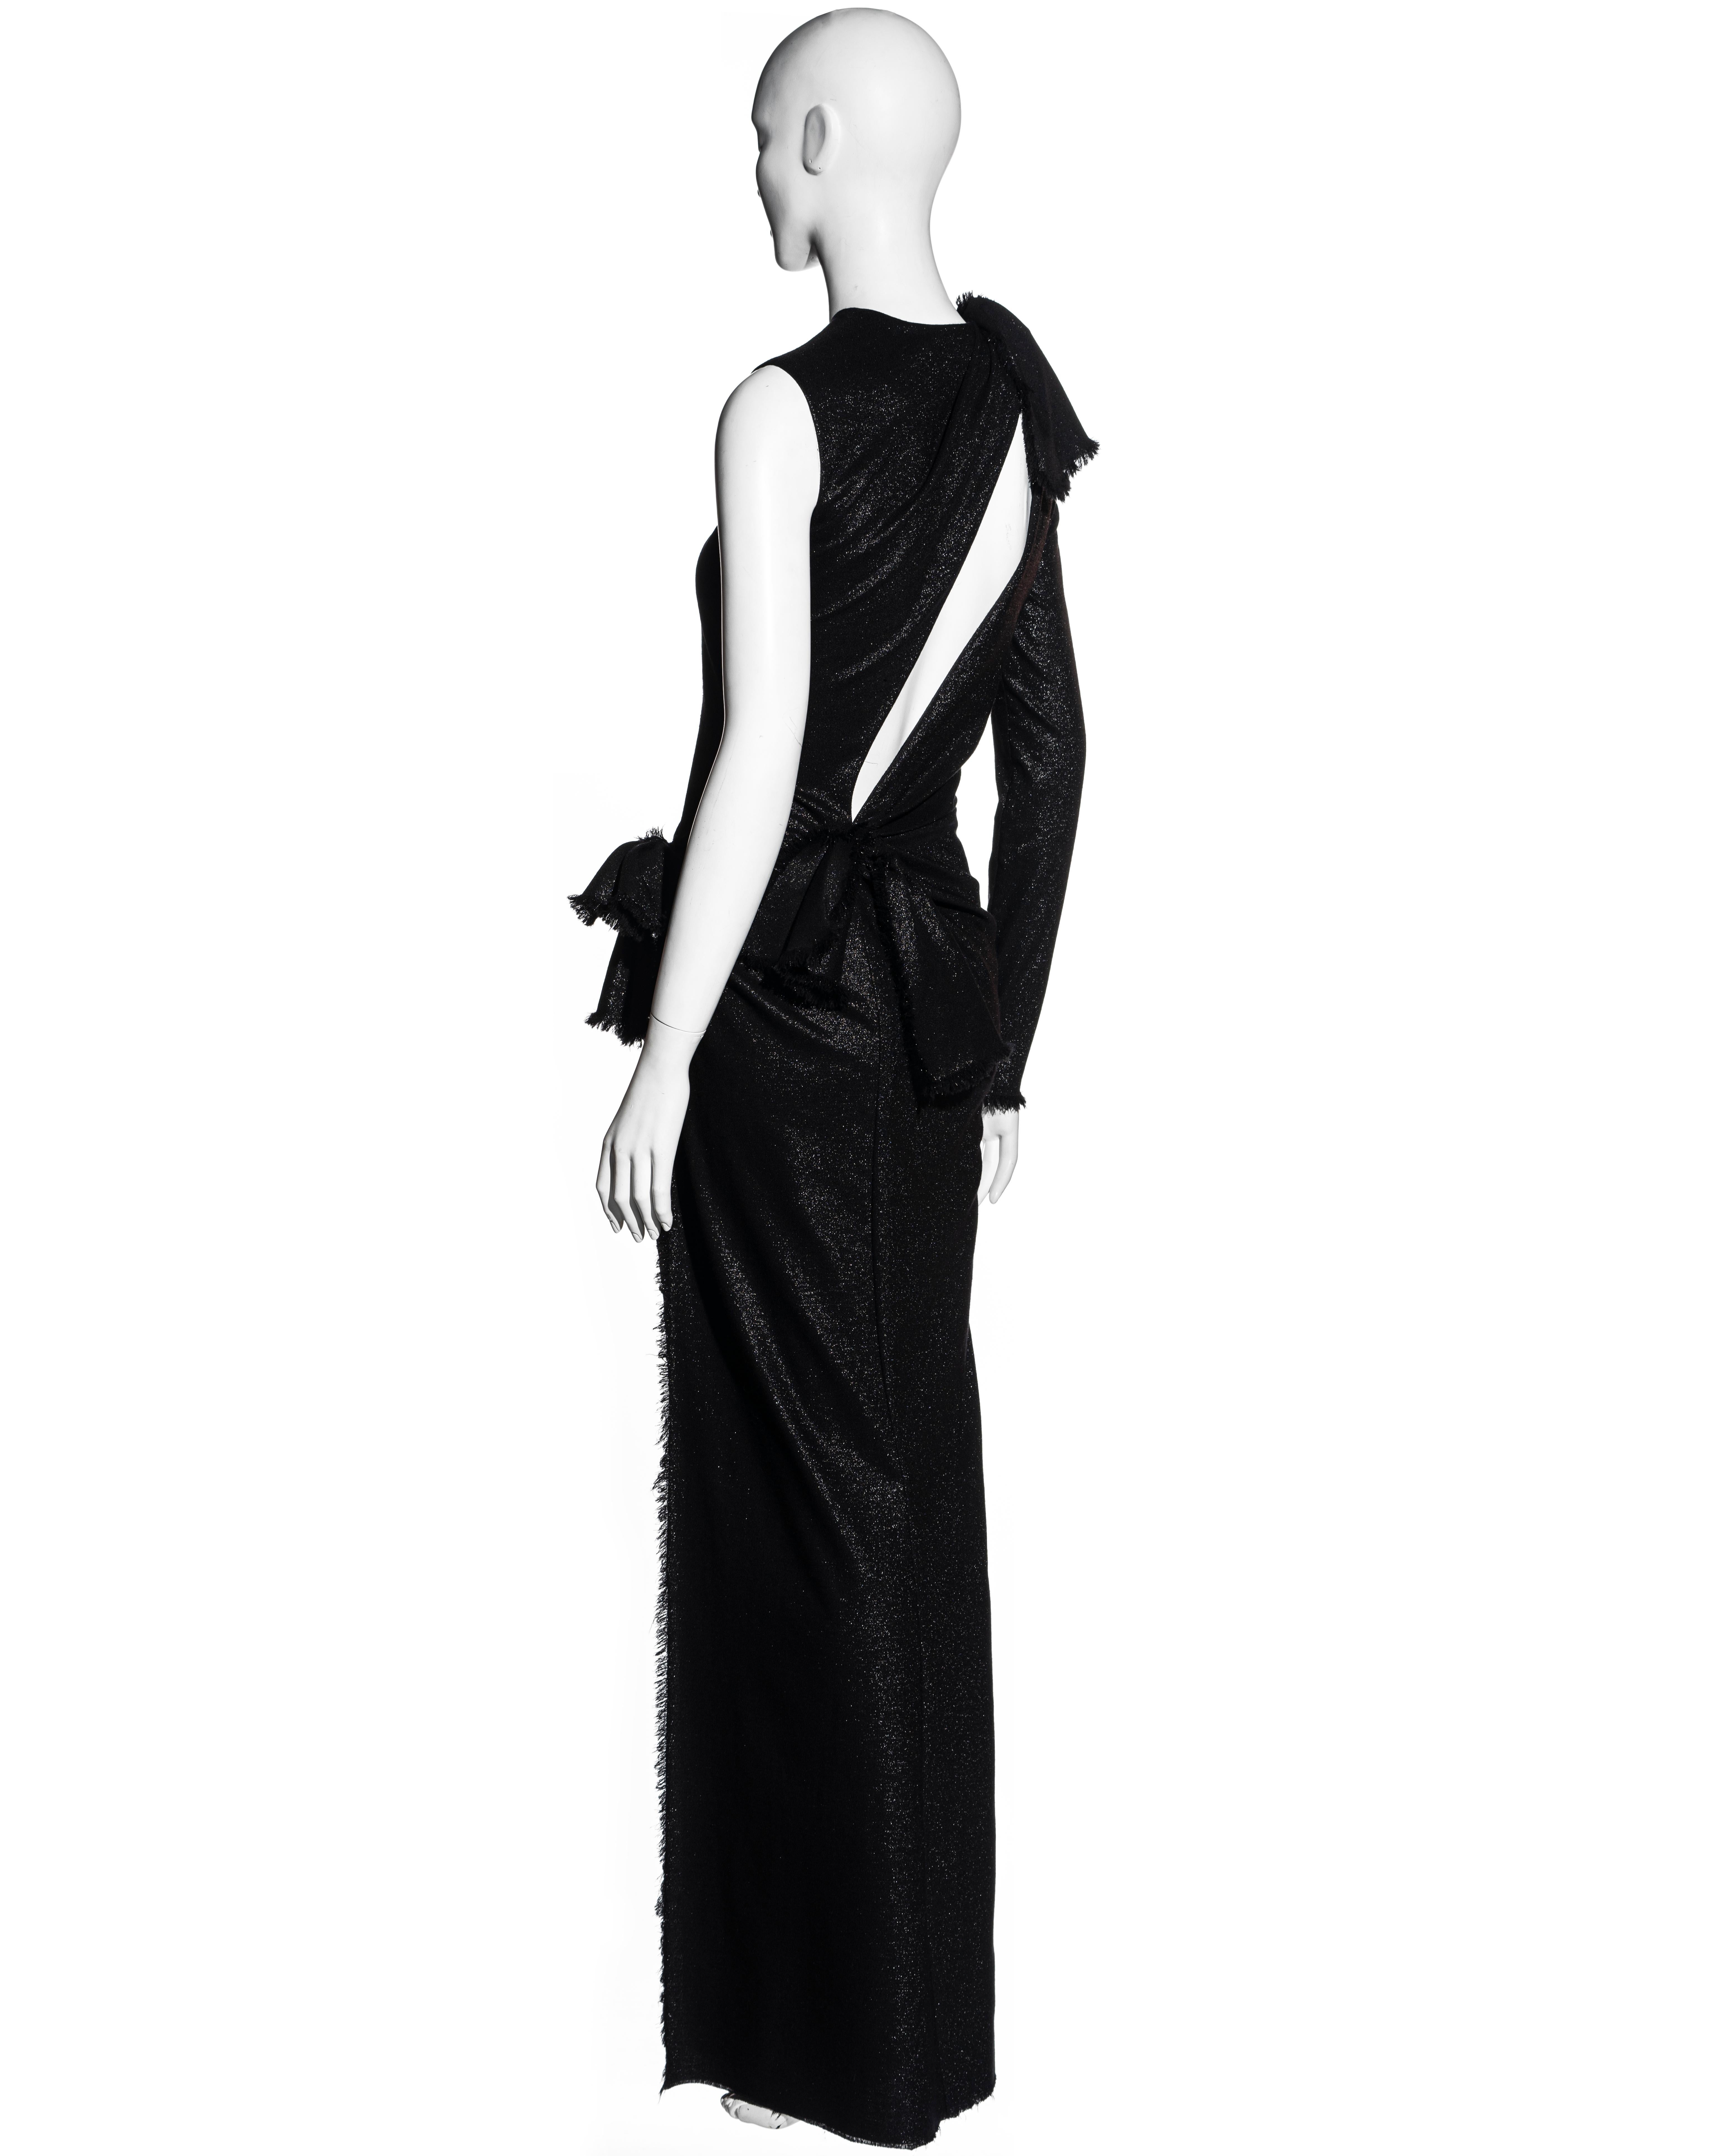 Versace black wool cut out maxi dress with high leg slit, ss 2016 In Excellent Condition For Sale In London, GB